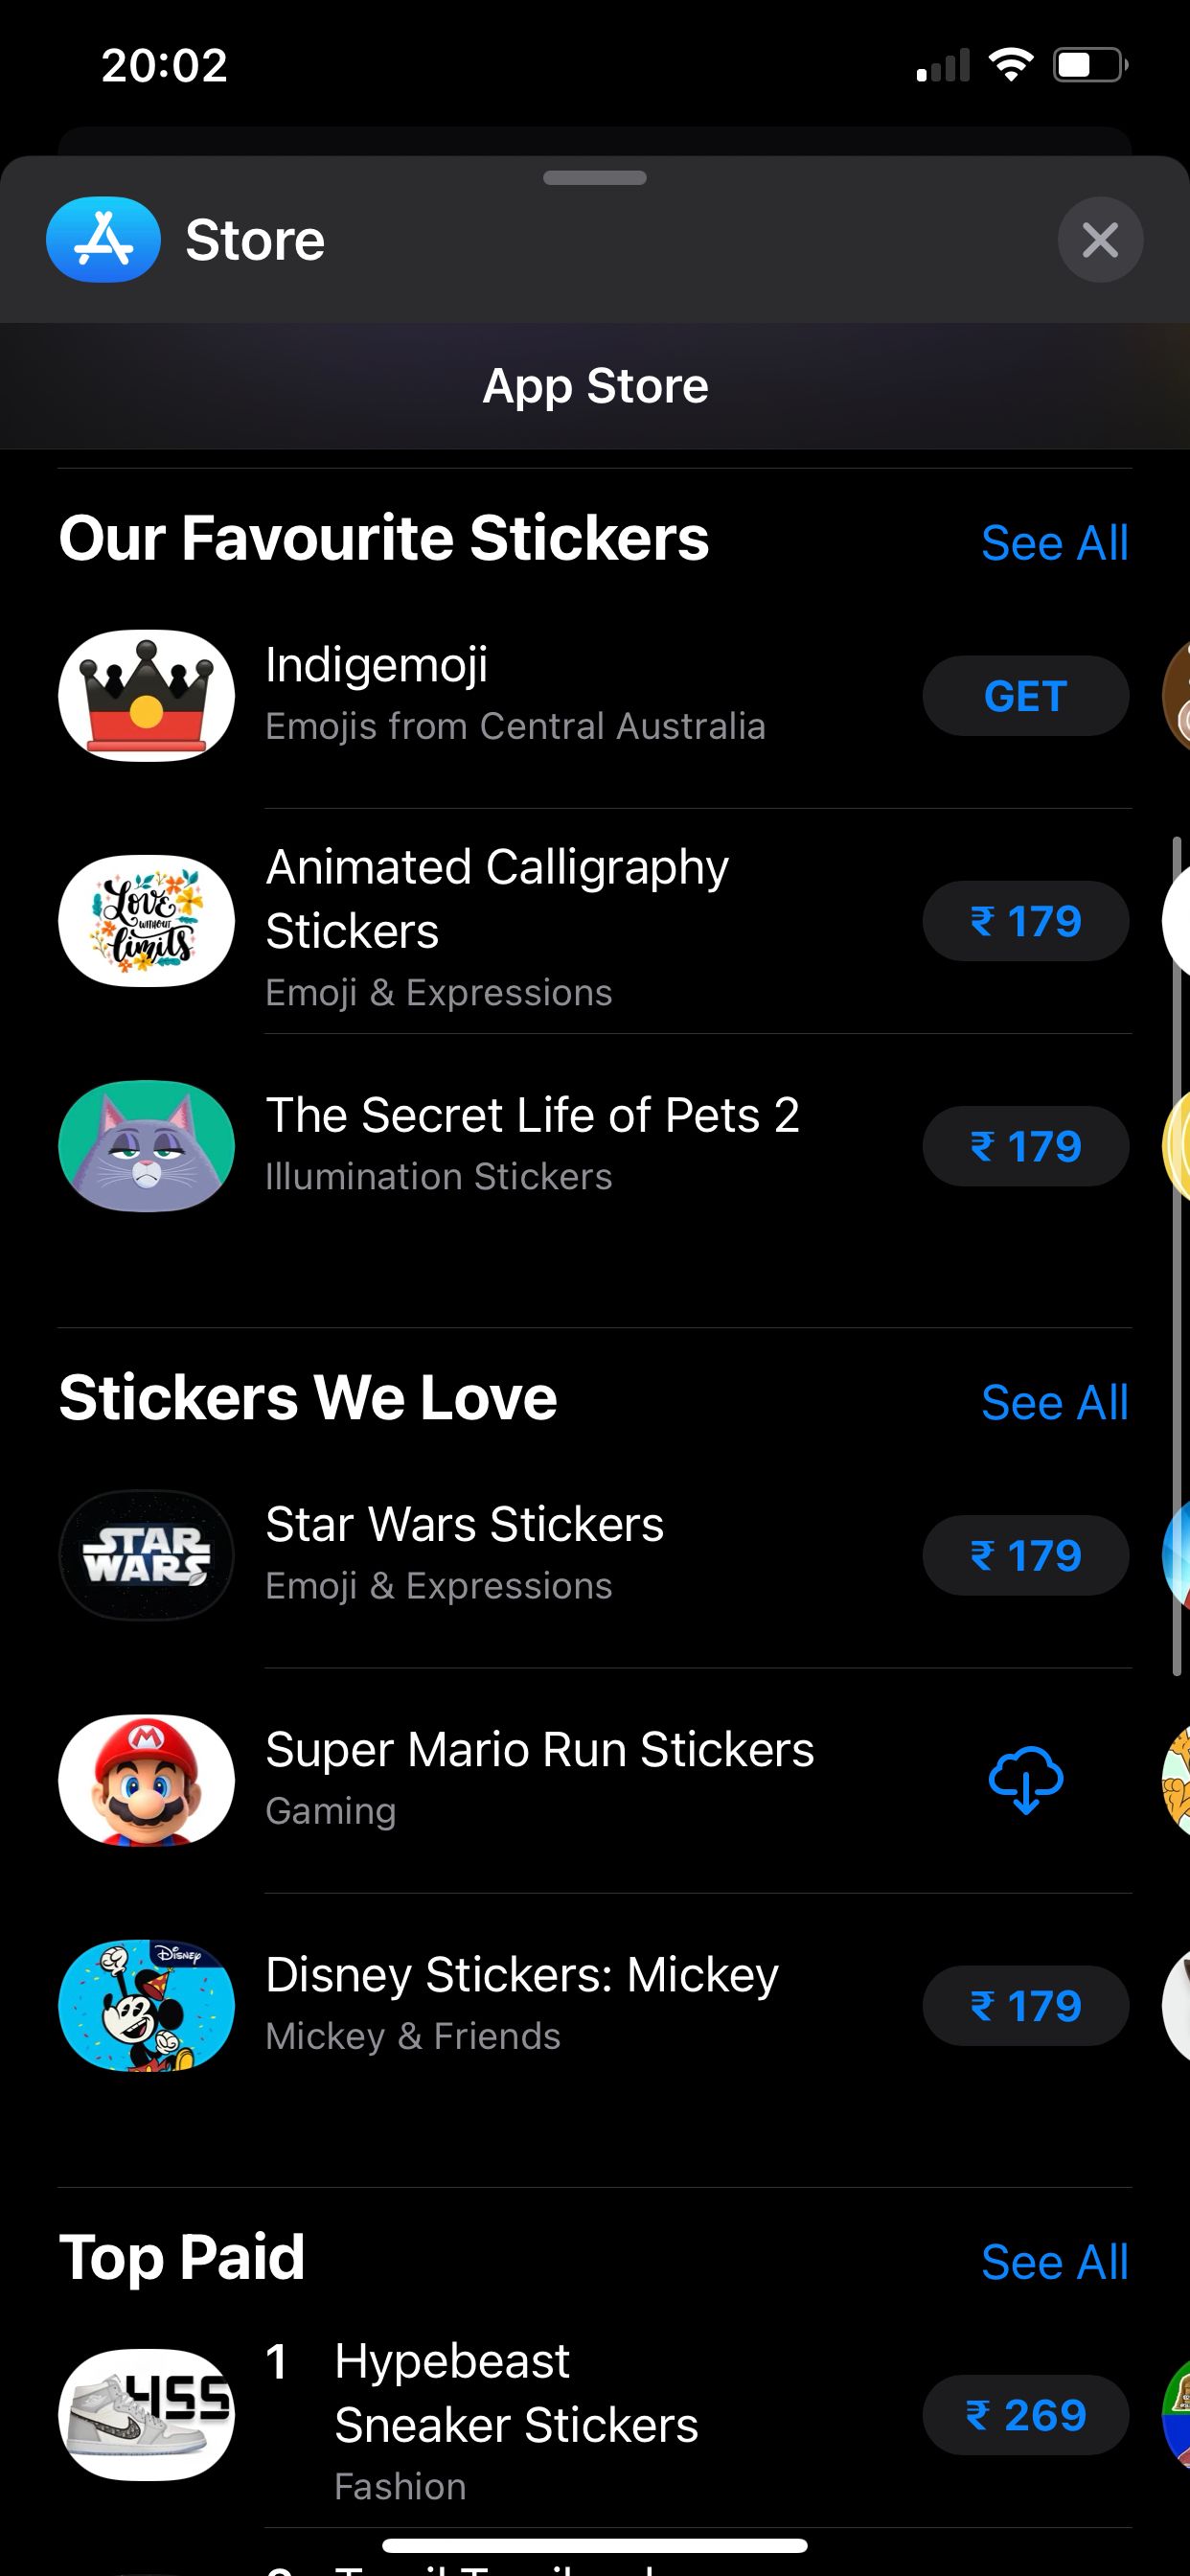 Curated sticker app collections on iMessage App Store.